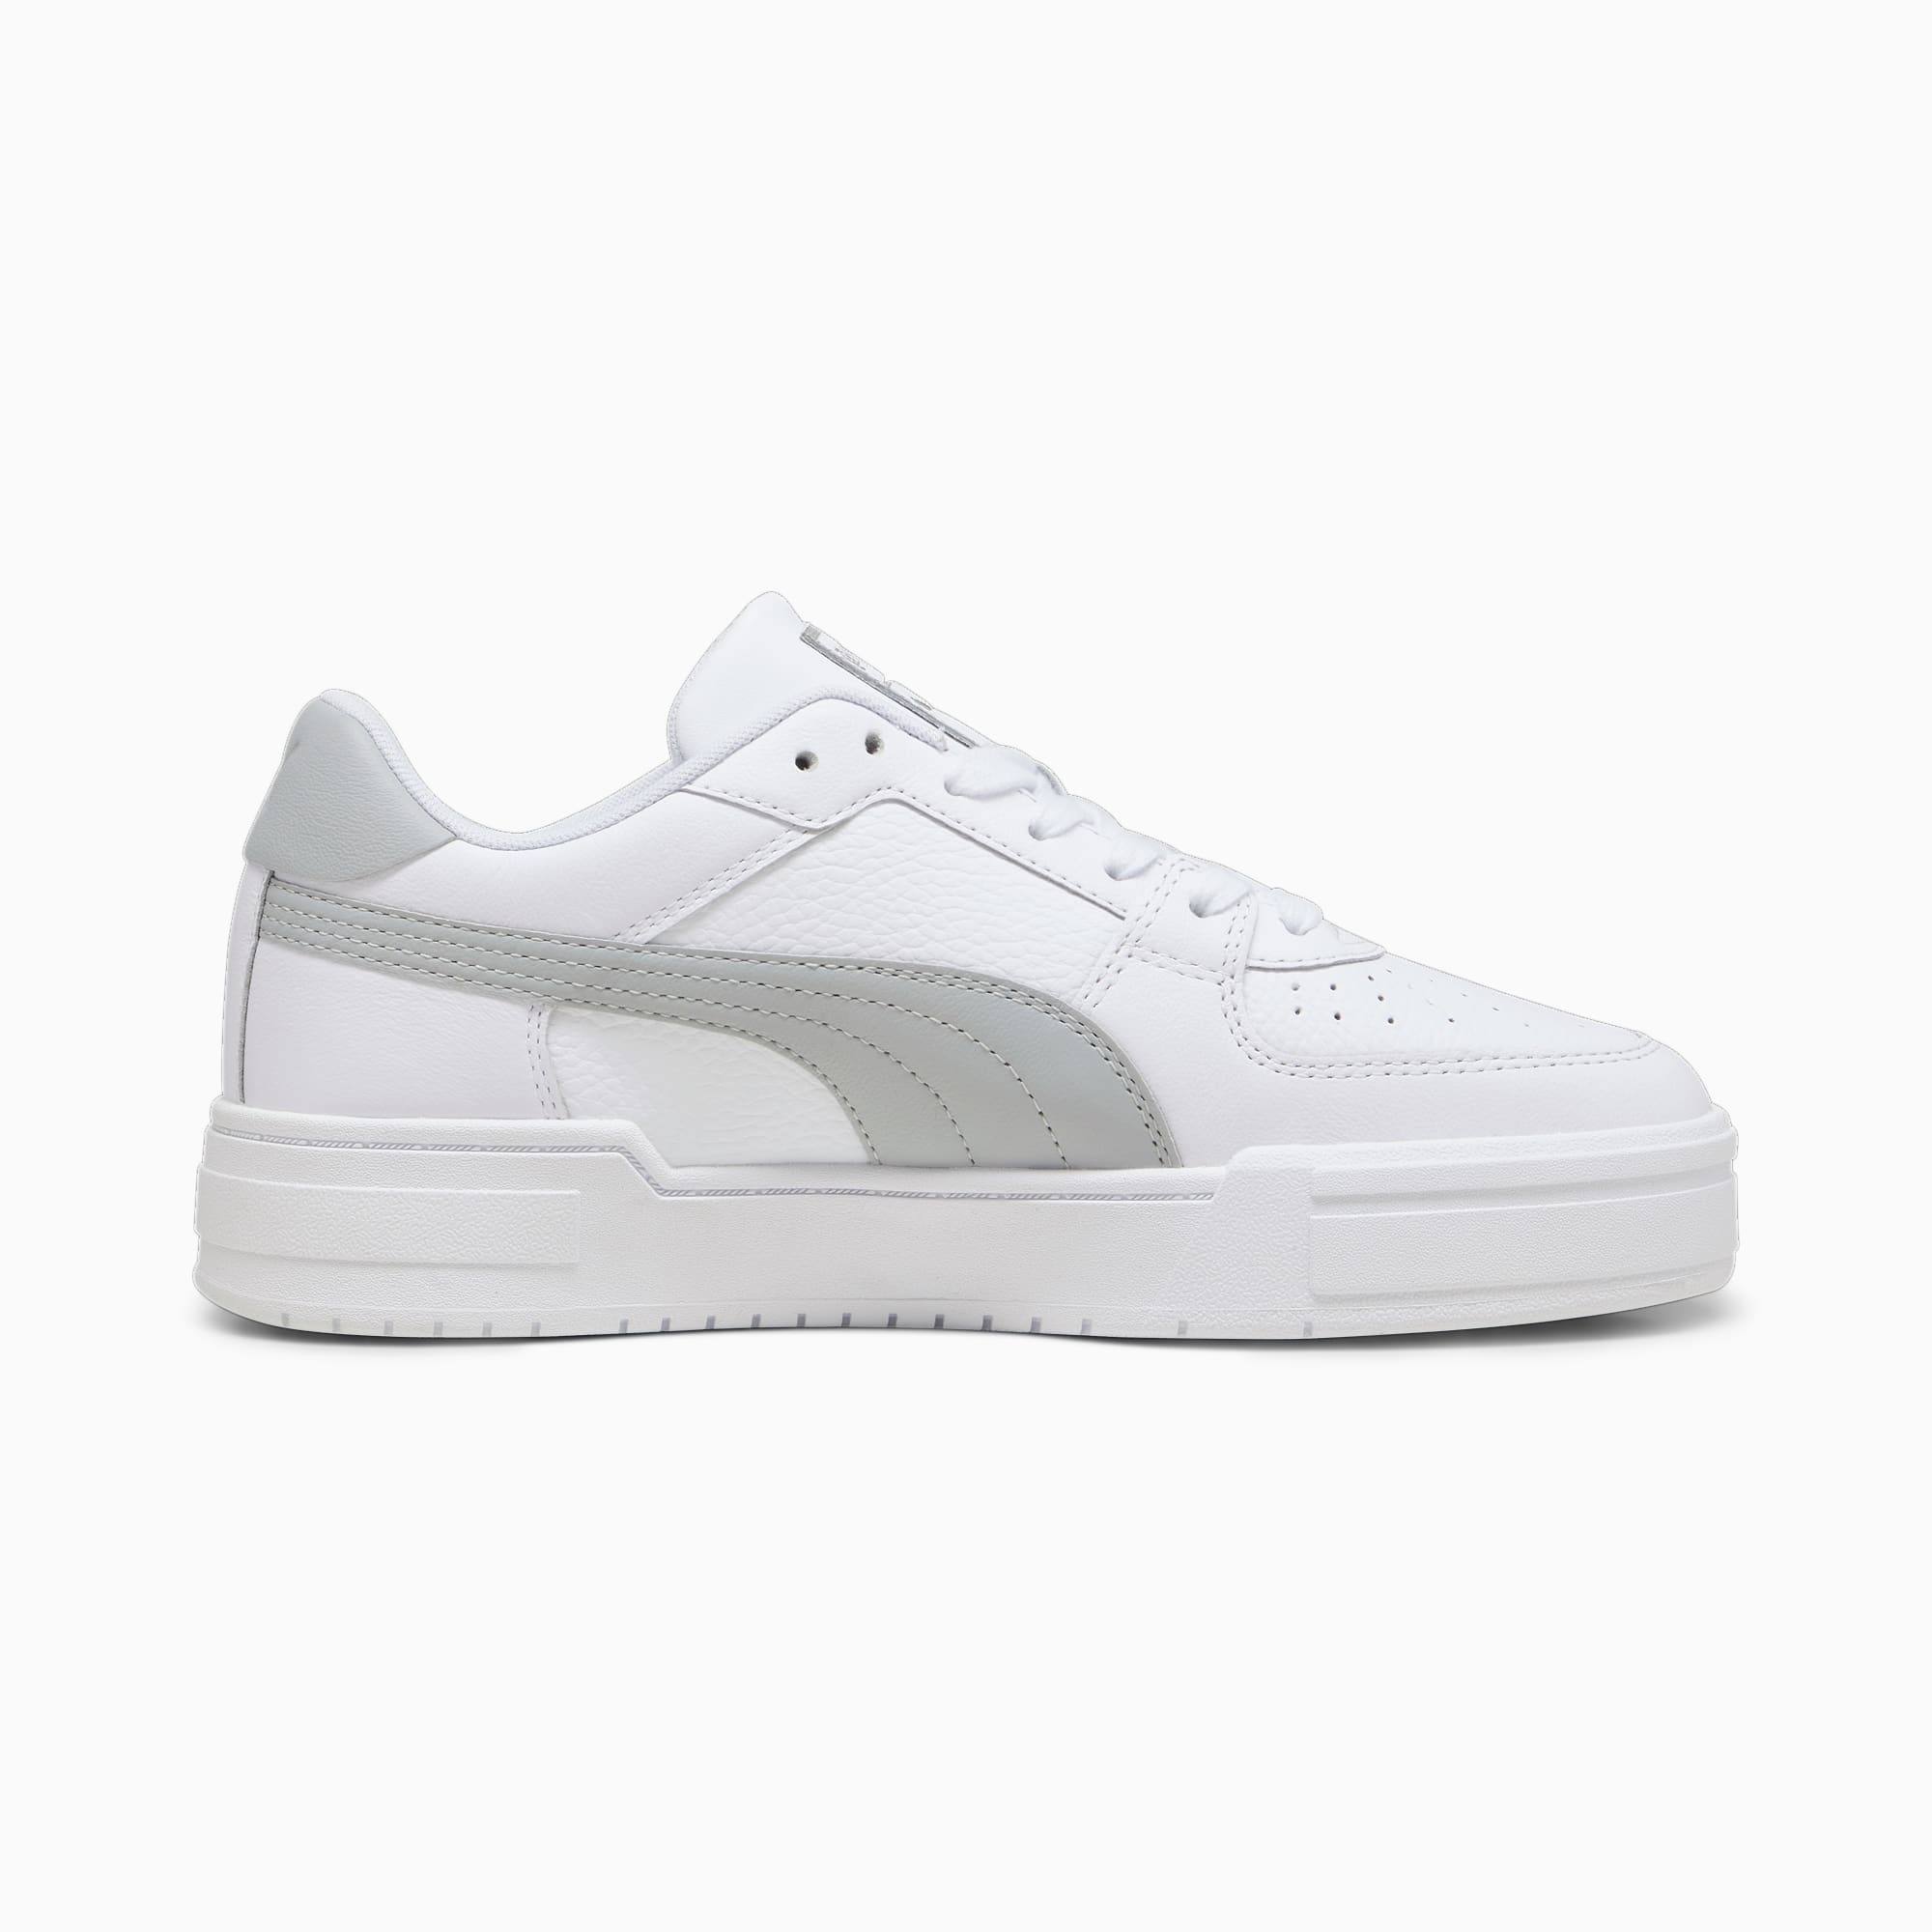 Women's PUMA Ca Pro Classic Trainers, White/Cool Light Grey, Size 37,5, Shoes